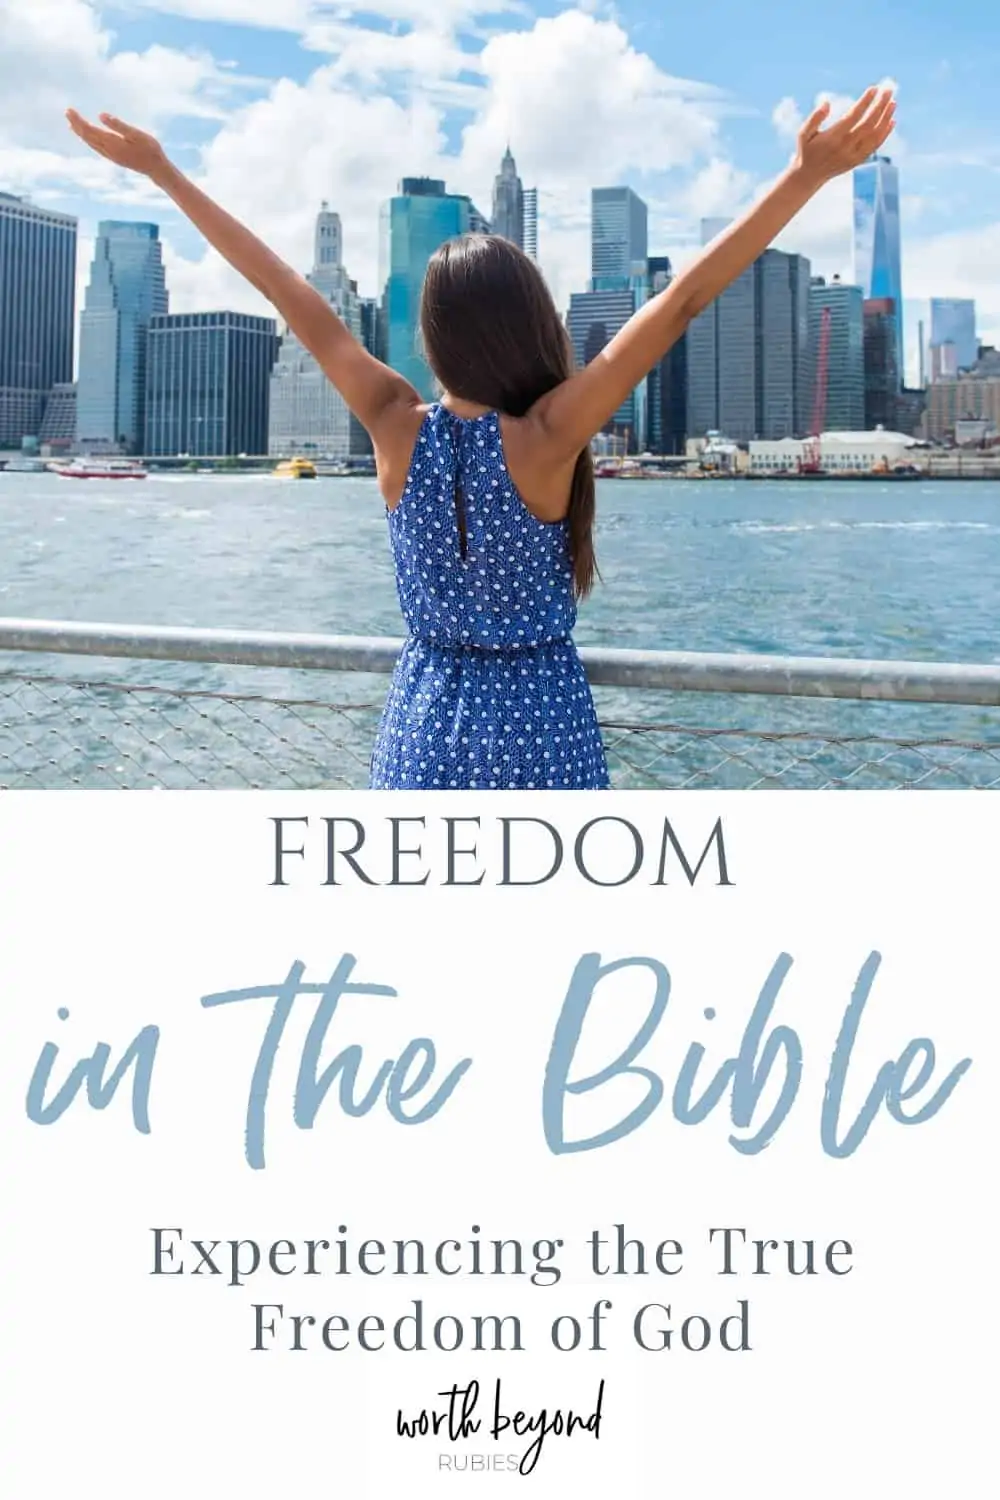 An image of a woman standing on the river facing the New York City skyline and she is wearing a blue, polka dot dress and her arms are up in the air toward the sky - a text overlay that says Freedom in the Bible - Experiencing the True Freedom of God